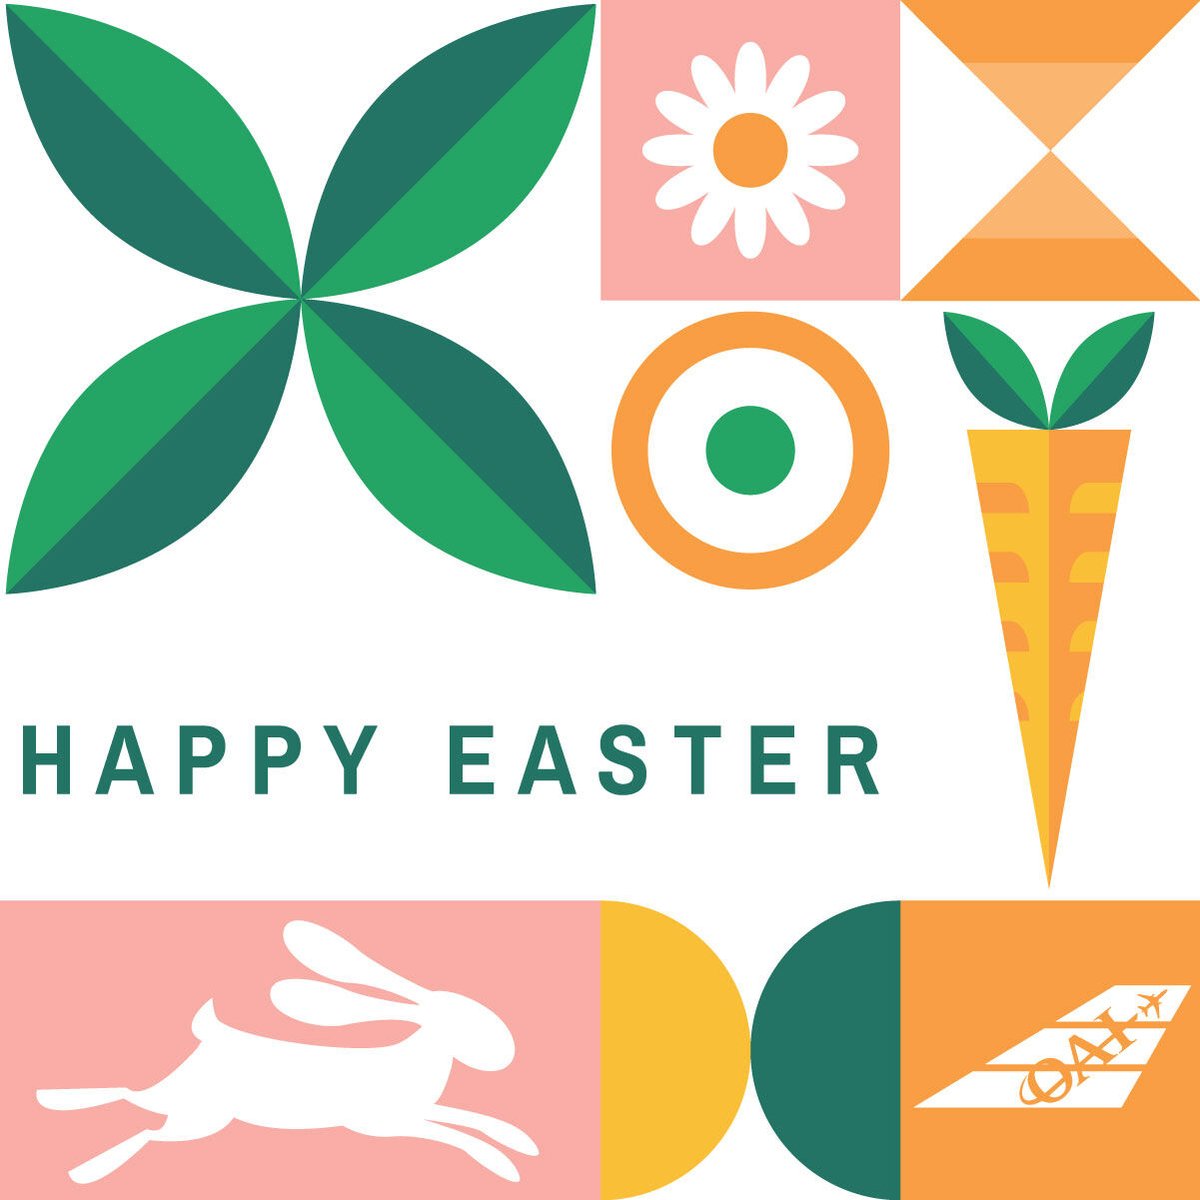 Happy Easter from Omni Air International!